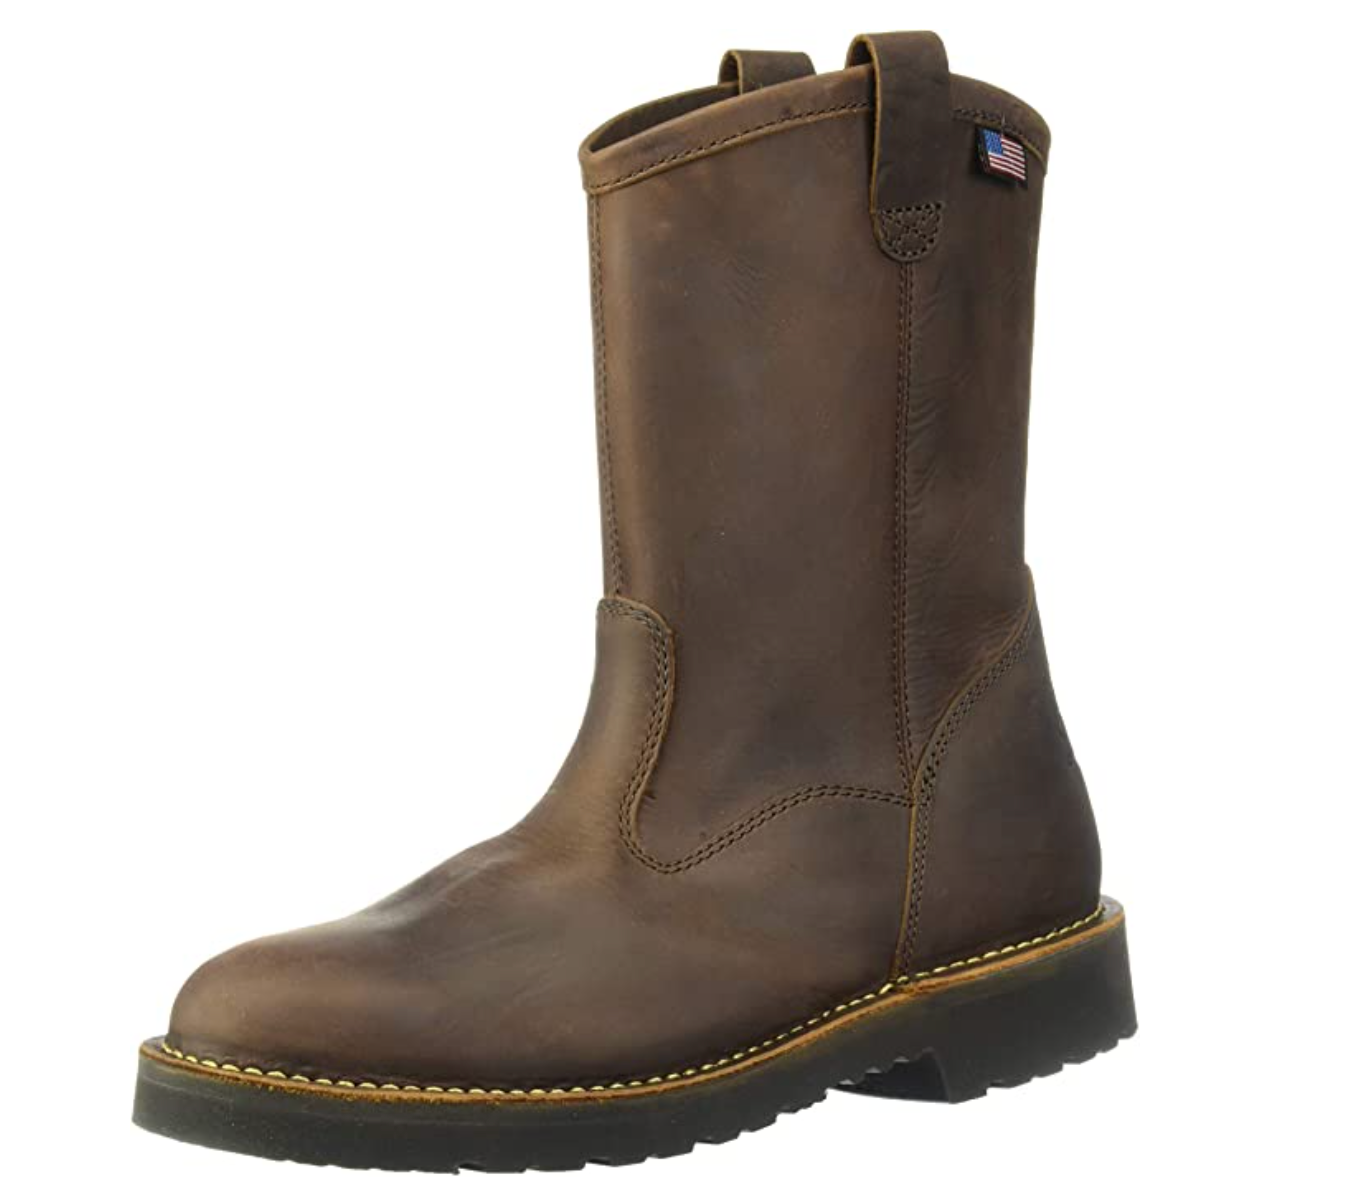 8 of the best work boots for farmers -- 2021 edition | AGDAILY